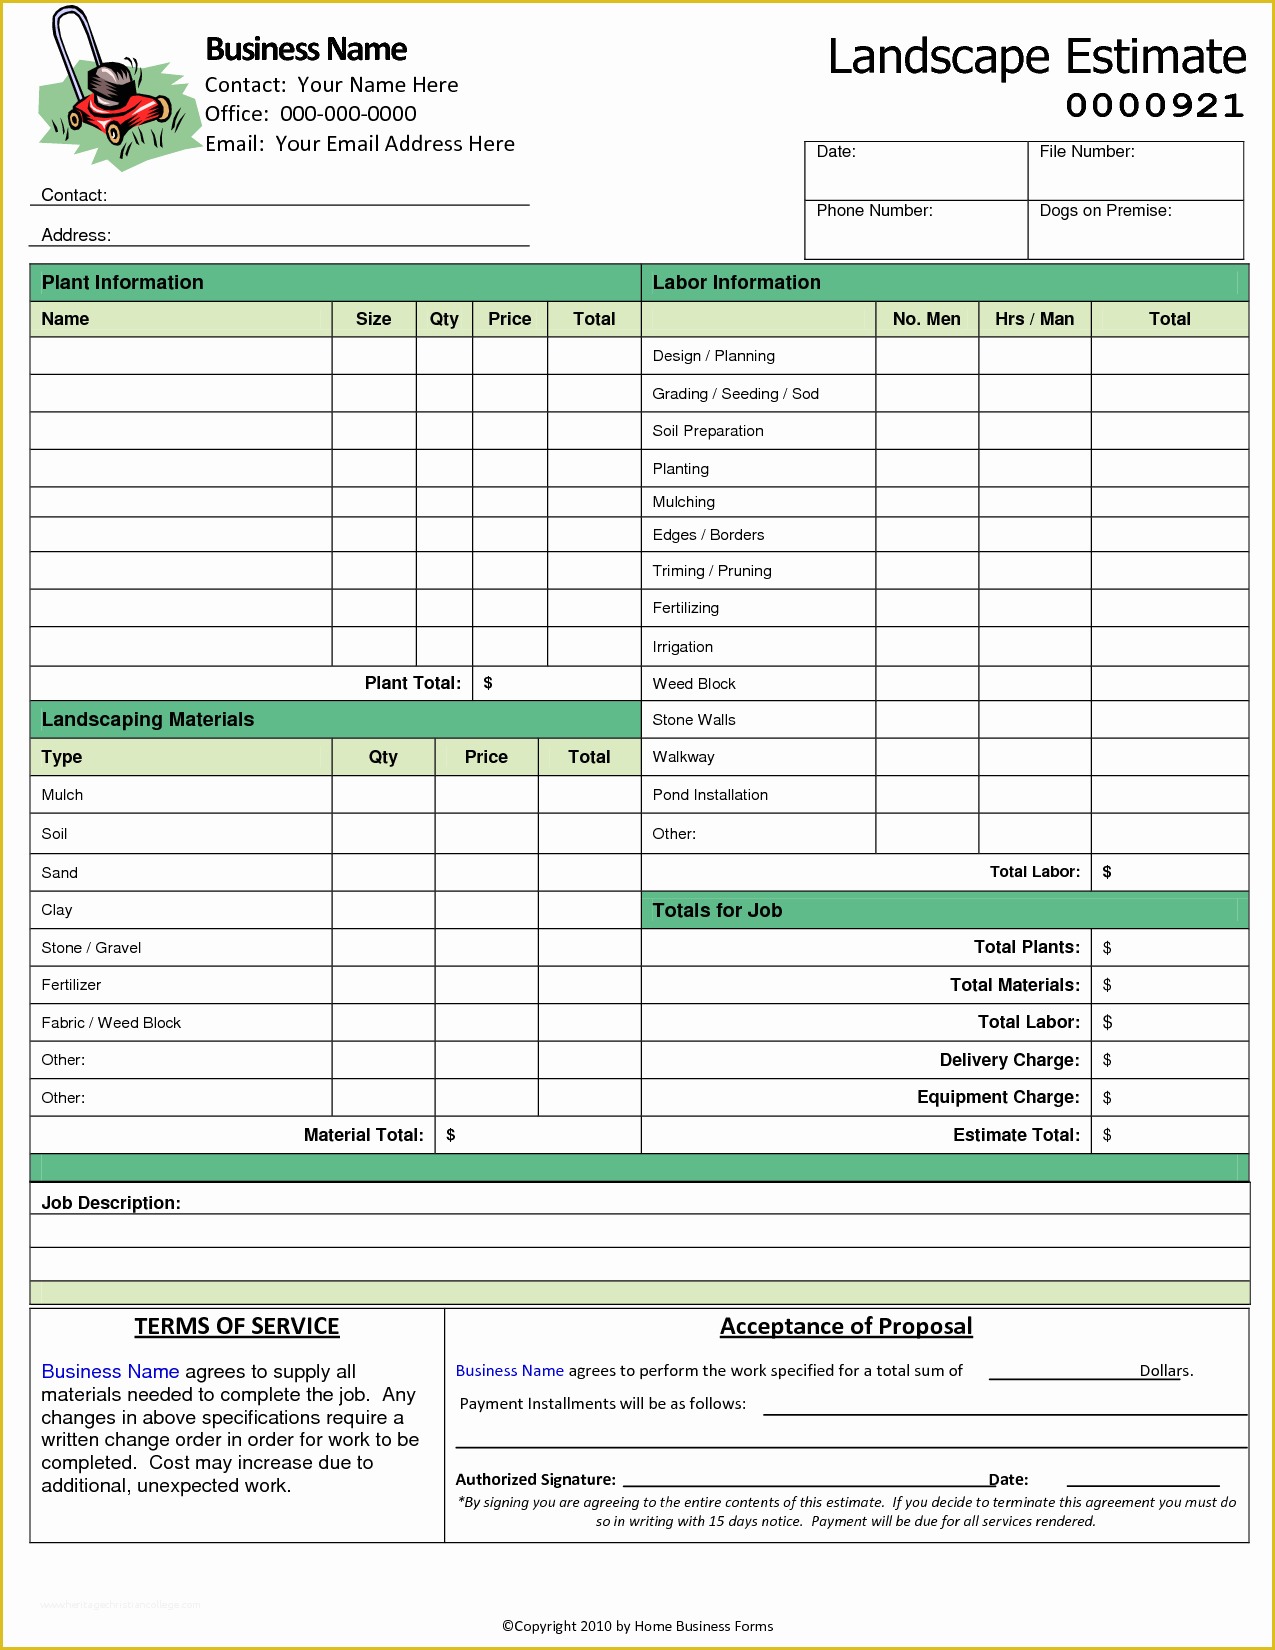 Lawn Service Proposal Template Free Of 8 Best Of Printable Landscape Estimate forms Lawn